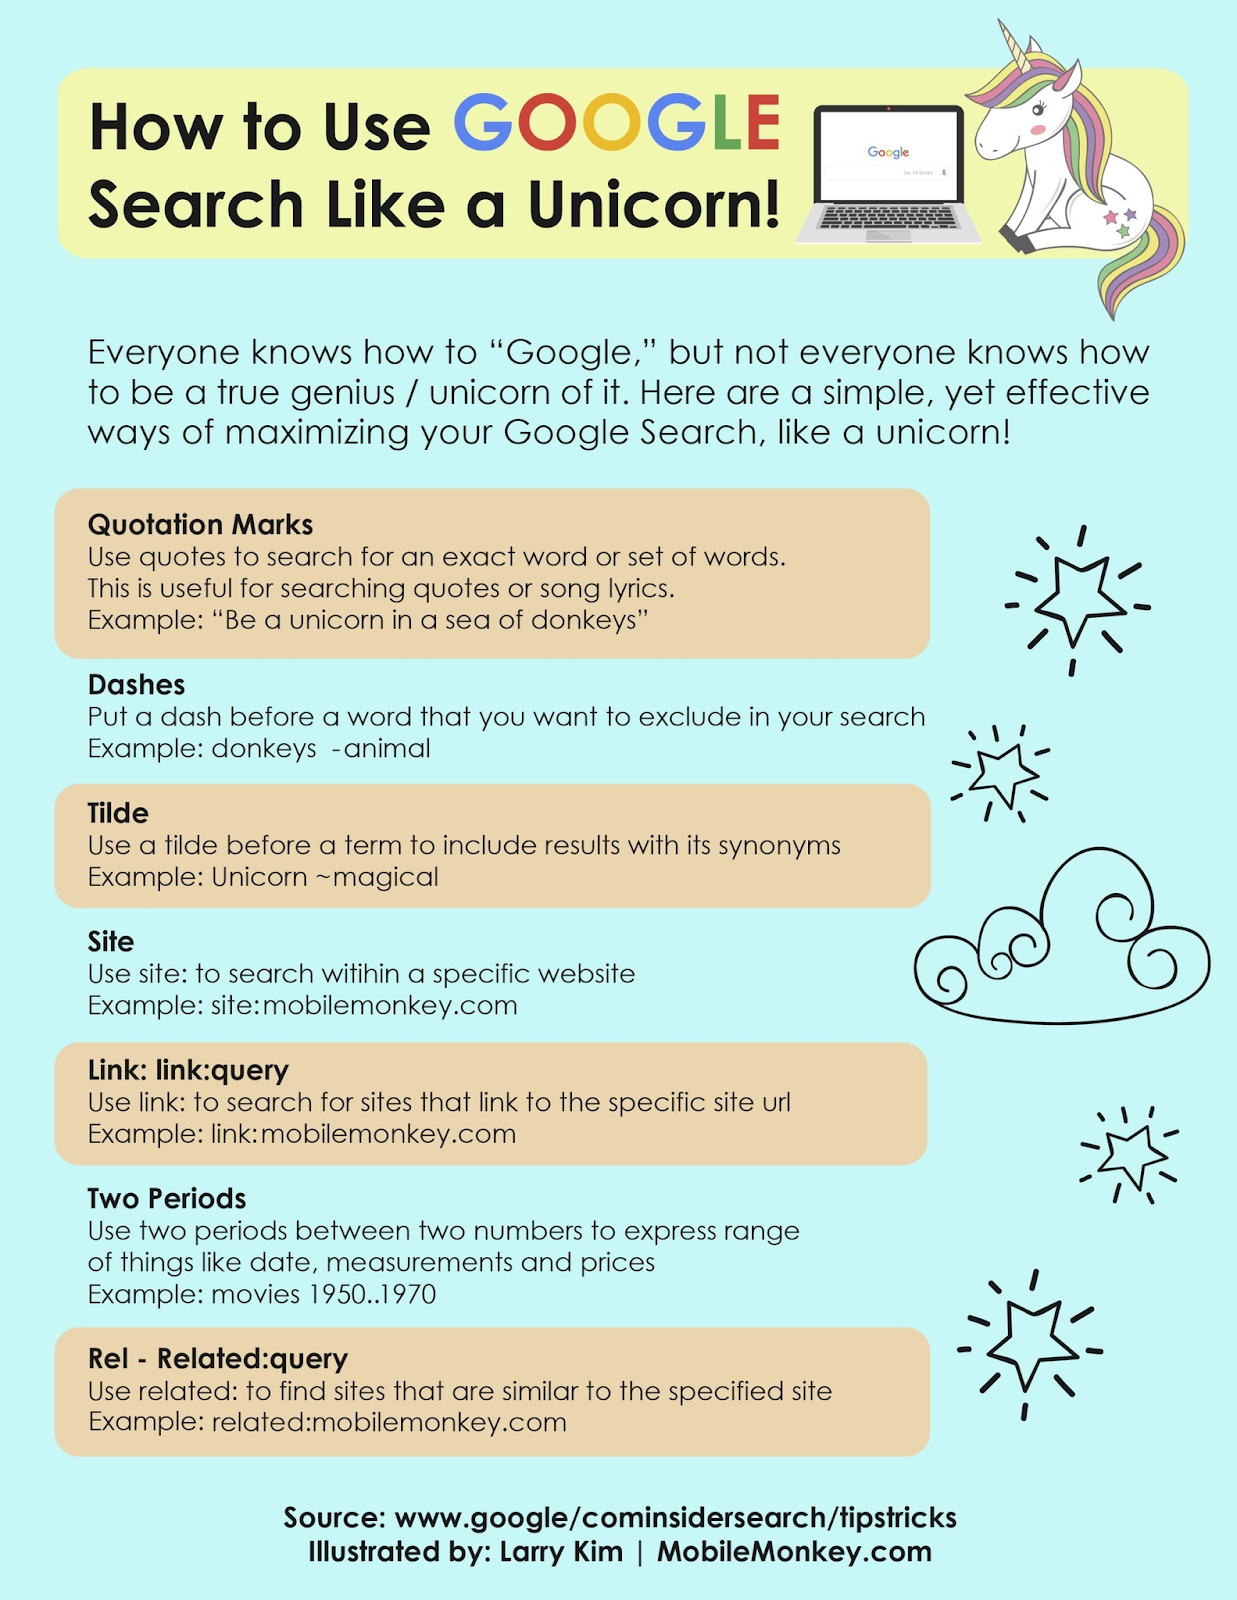 7 Google Search Shortcuts You Need to Know | Inc.com